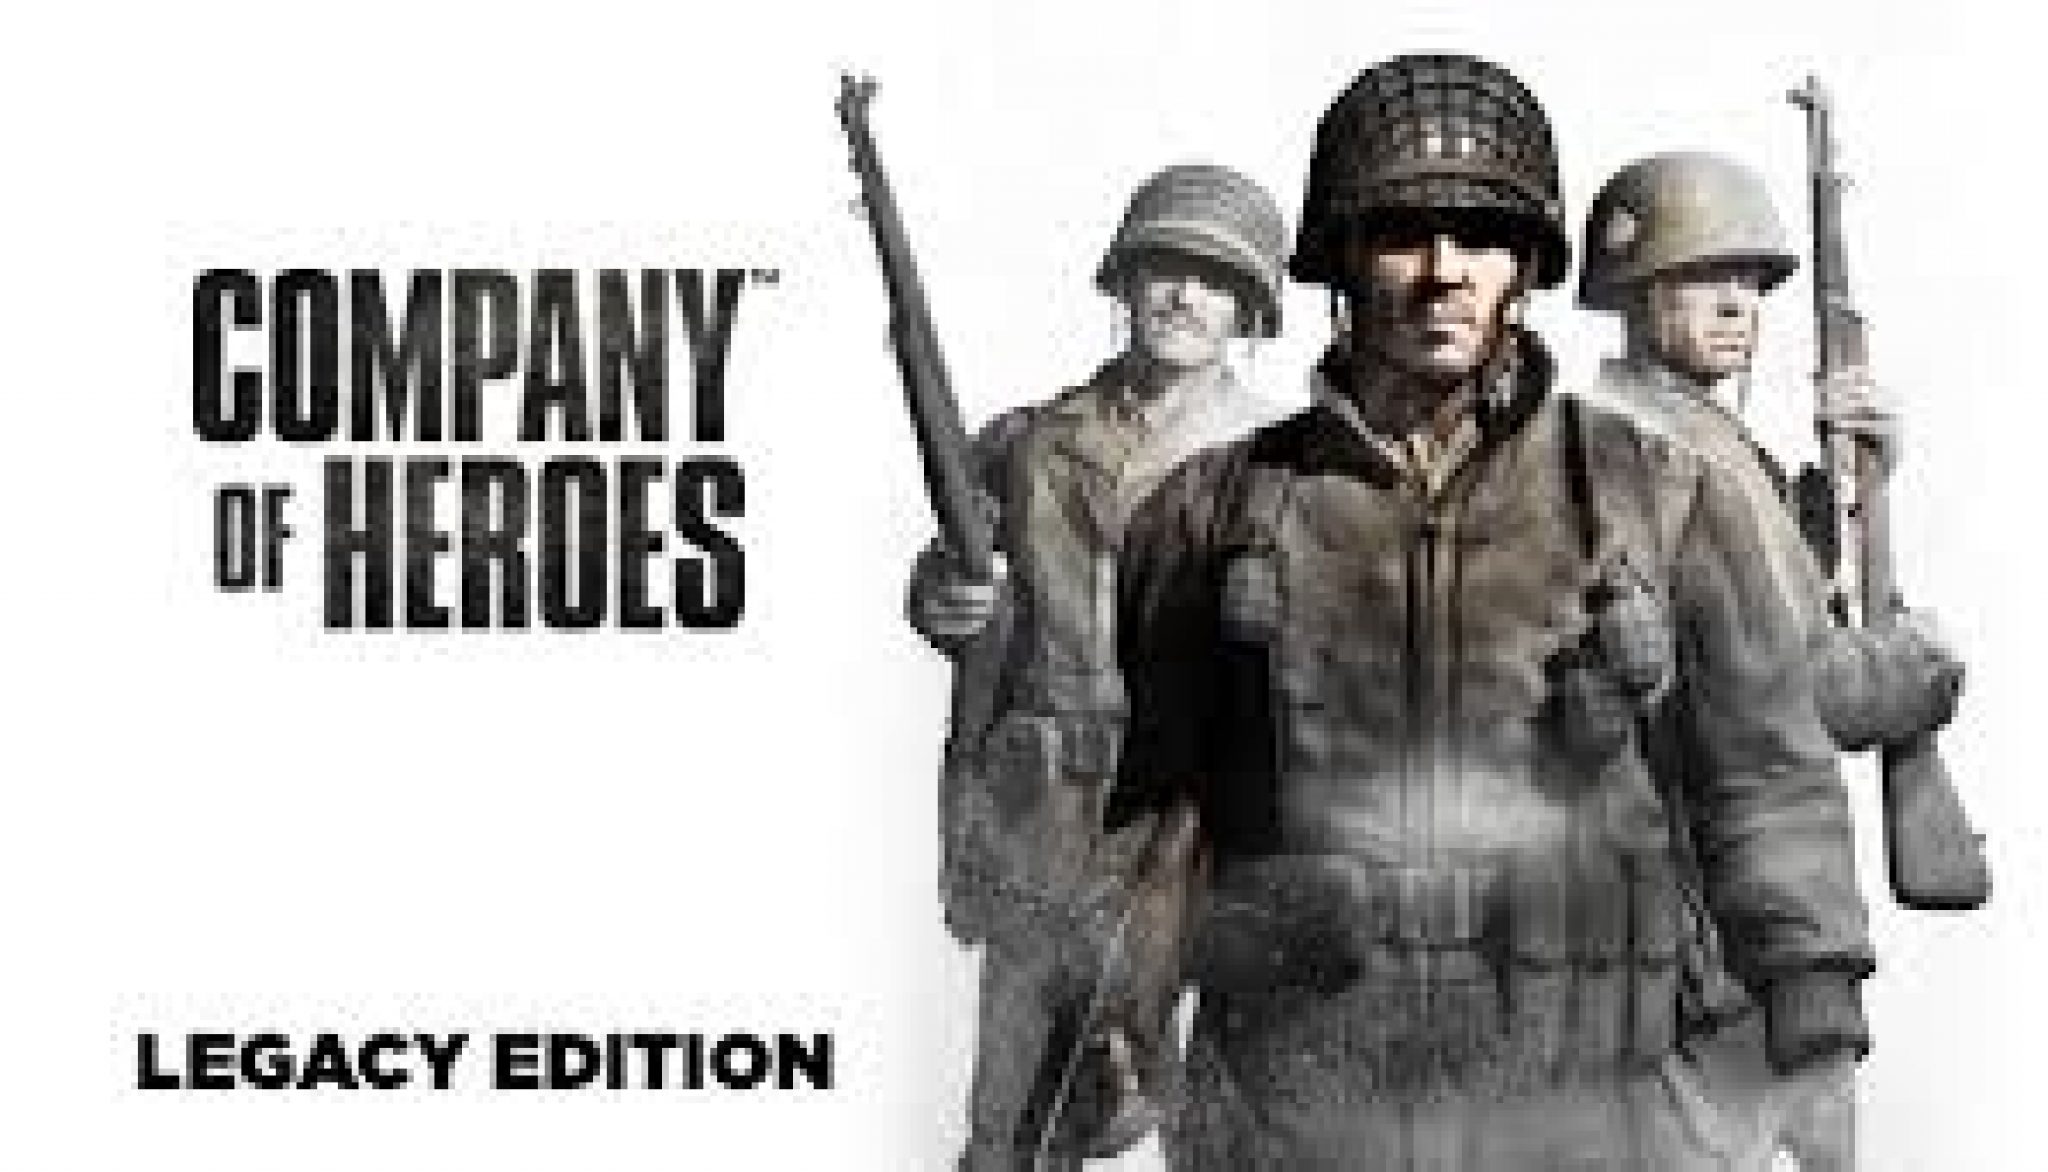 company of heroes 3 pacific